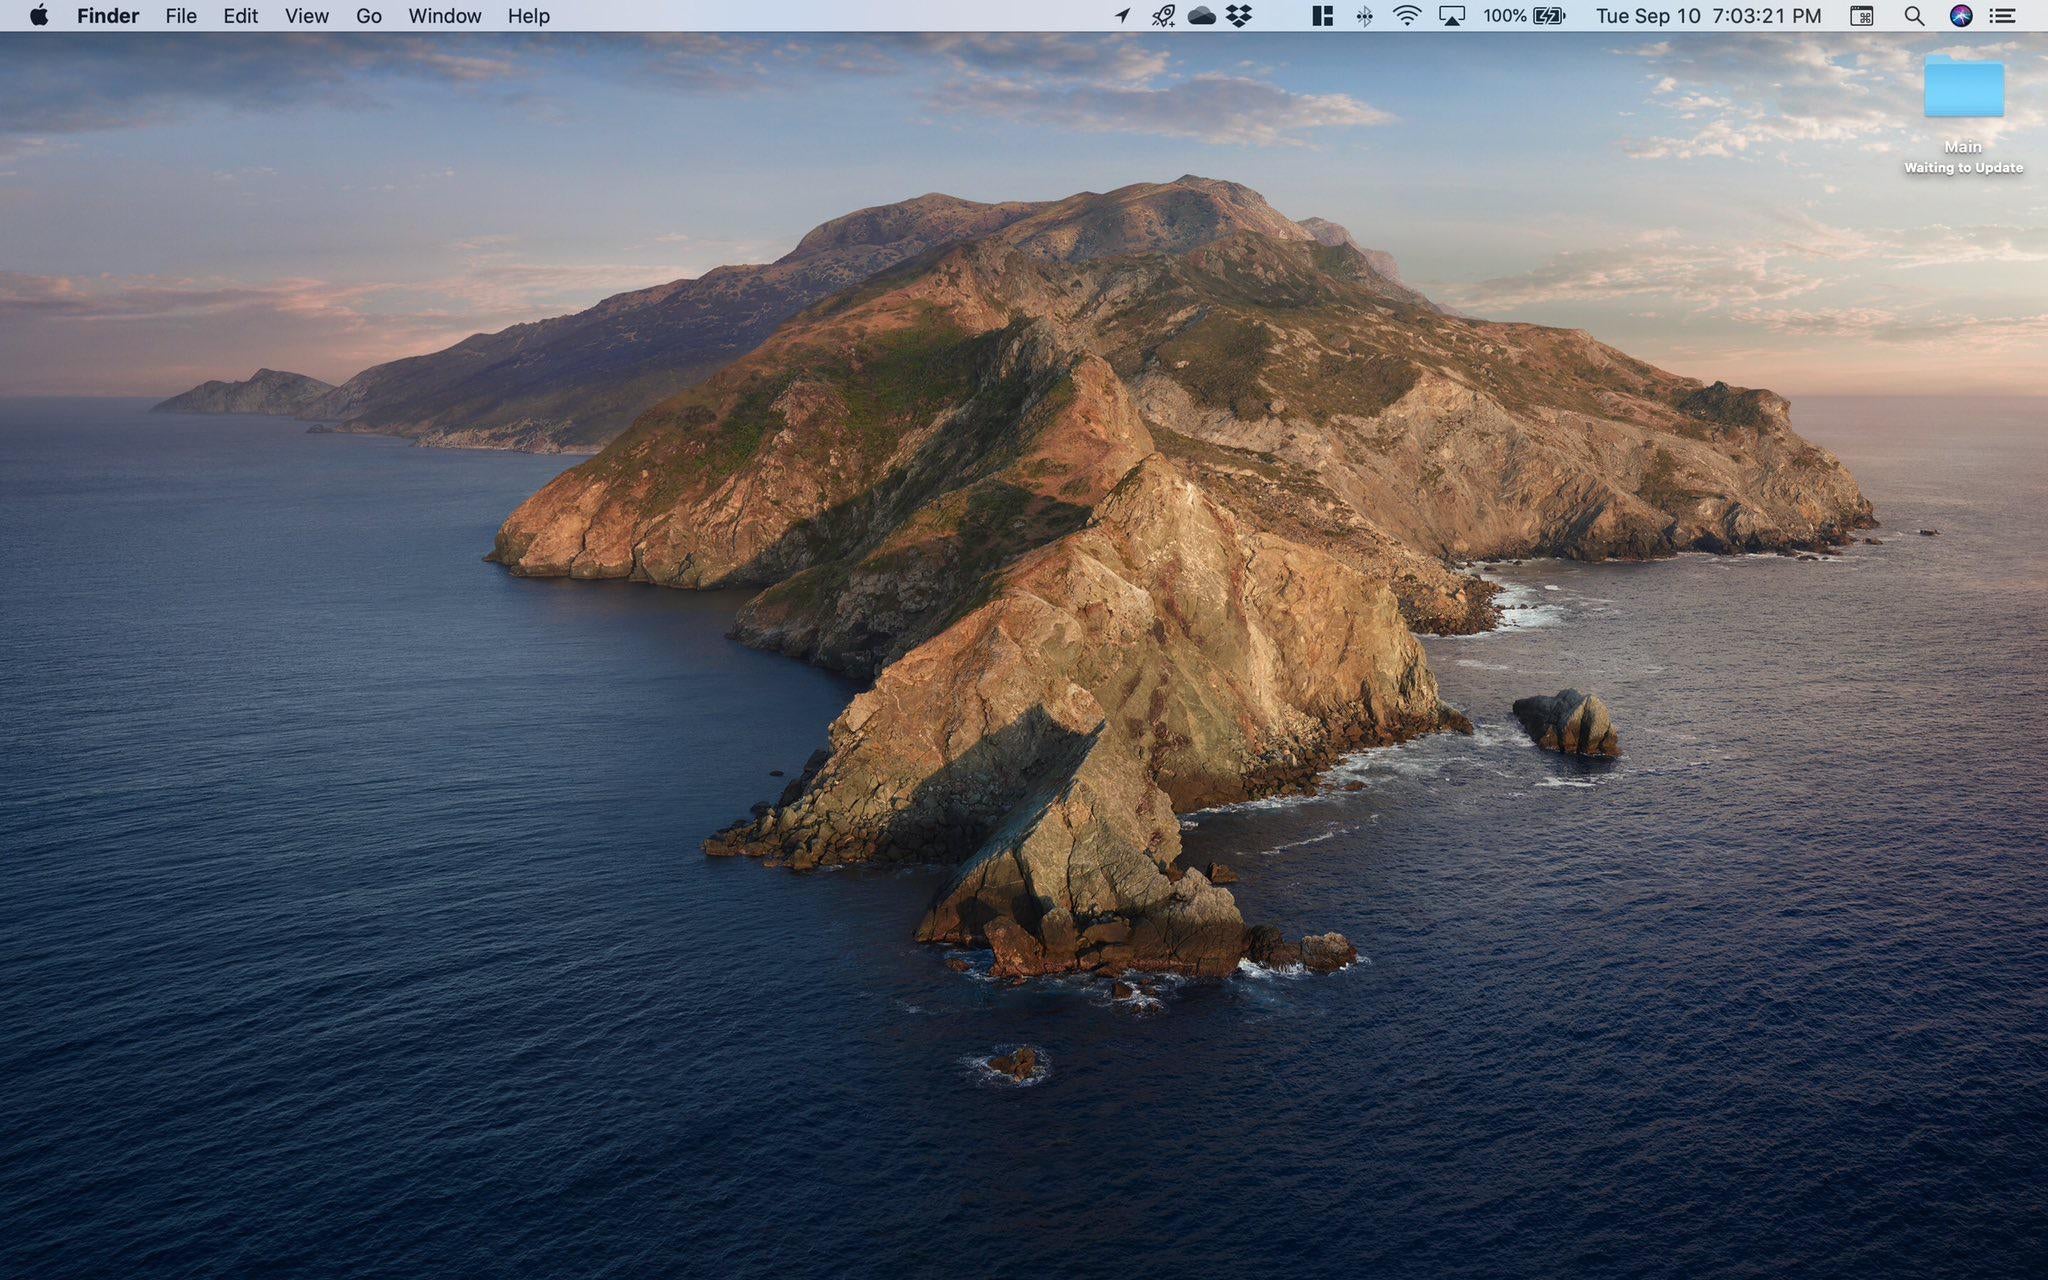 The Beta Of Macos Catalina Get Updated Dynamic Wallpaper